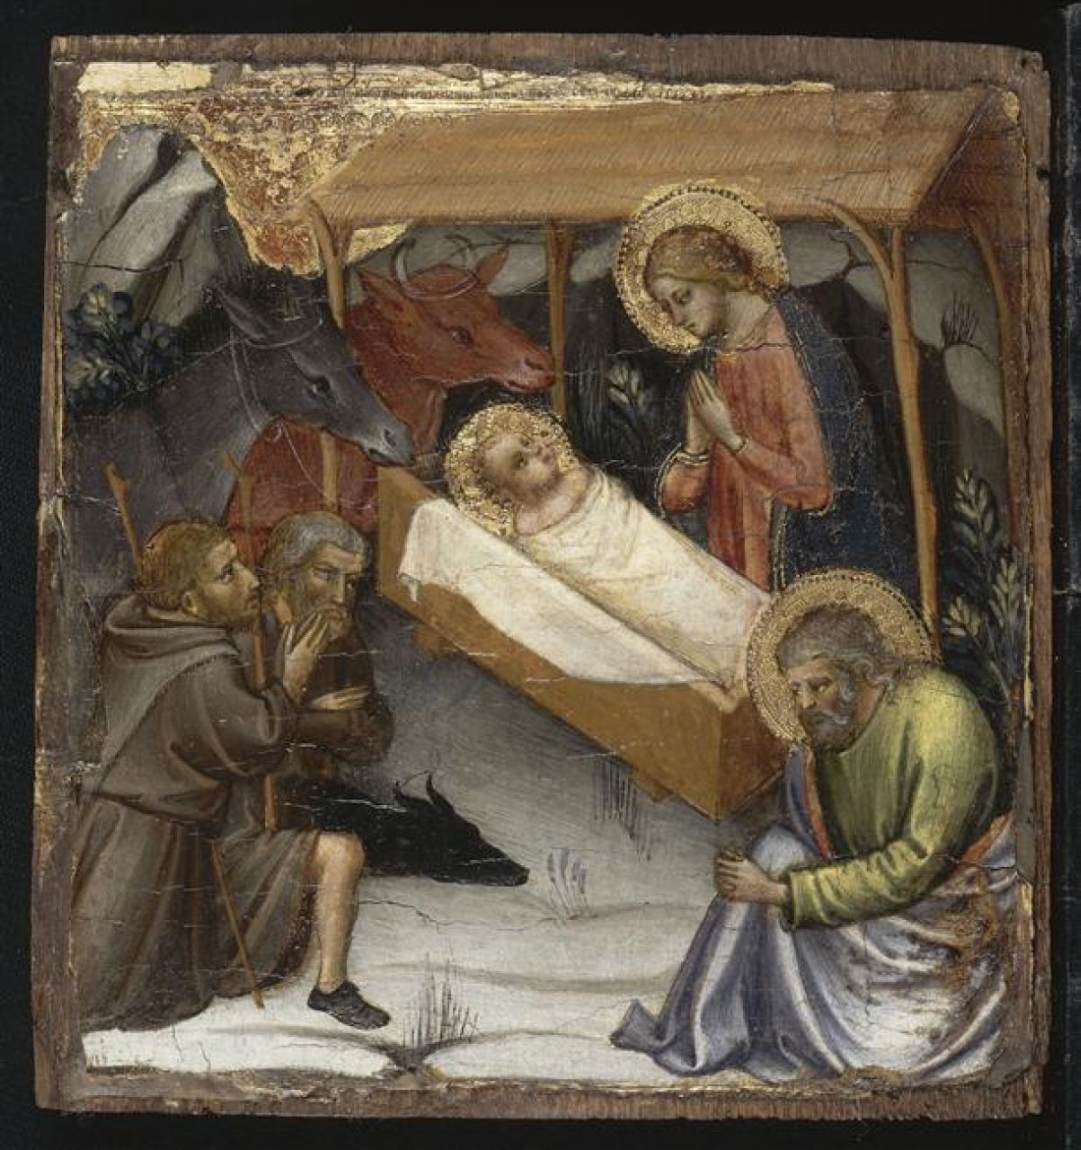 Scenes from the Life of Christ: The Nativity